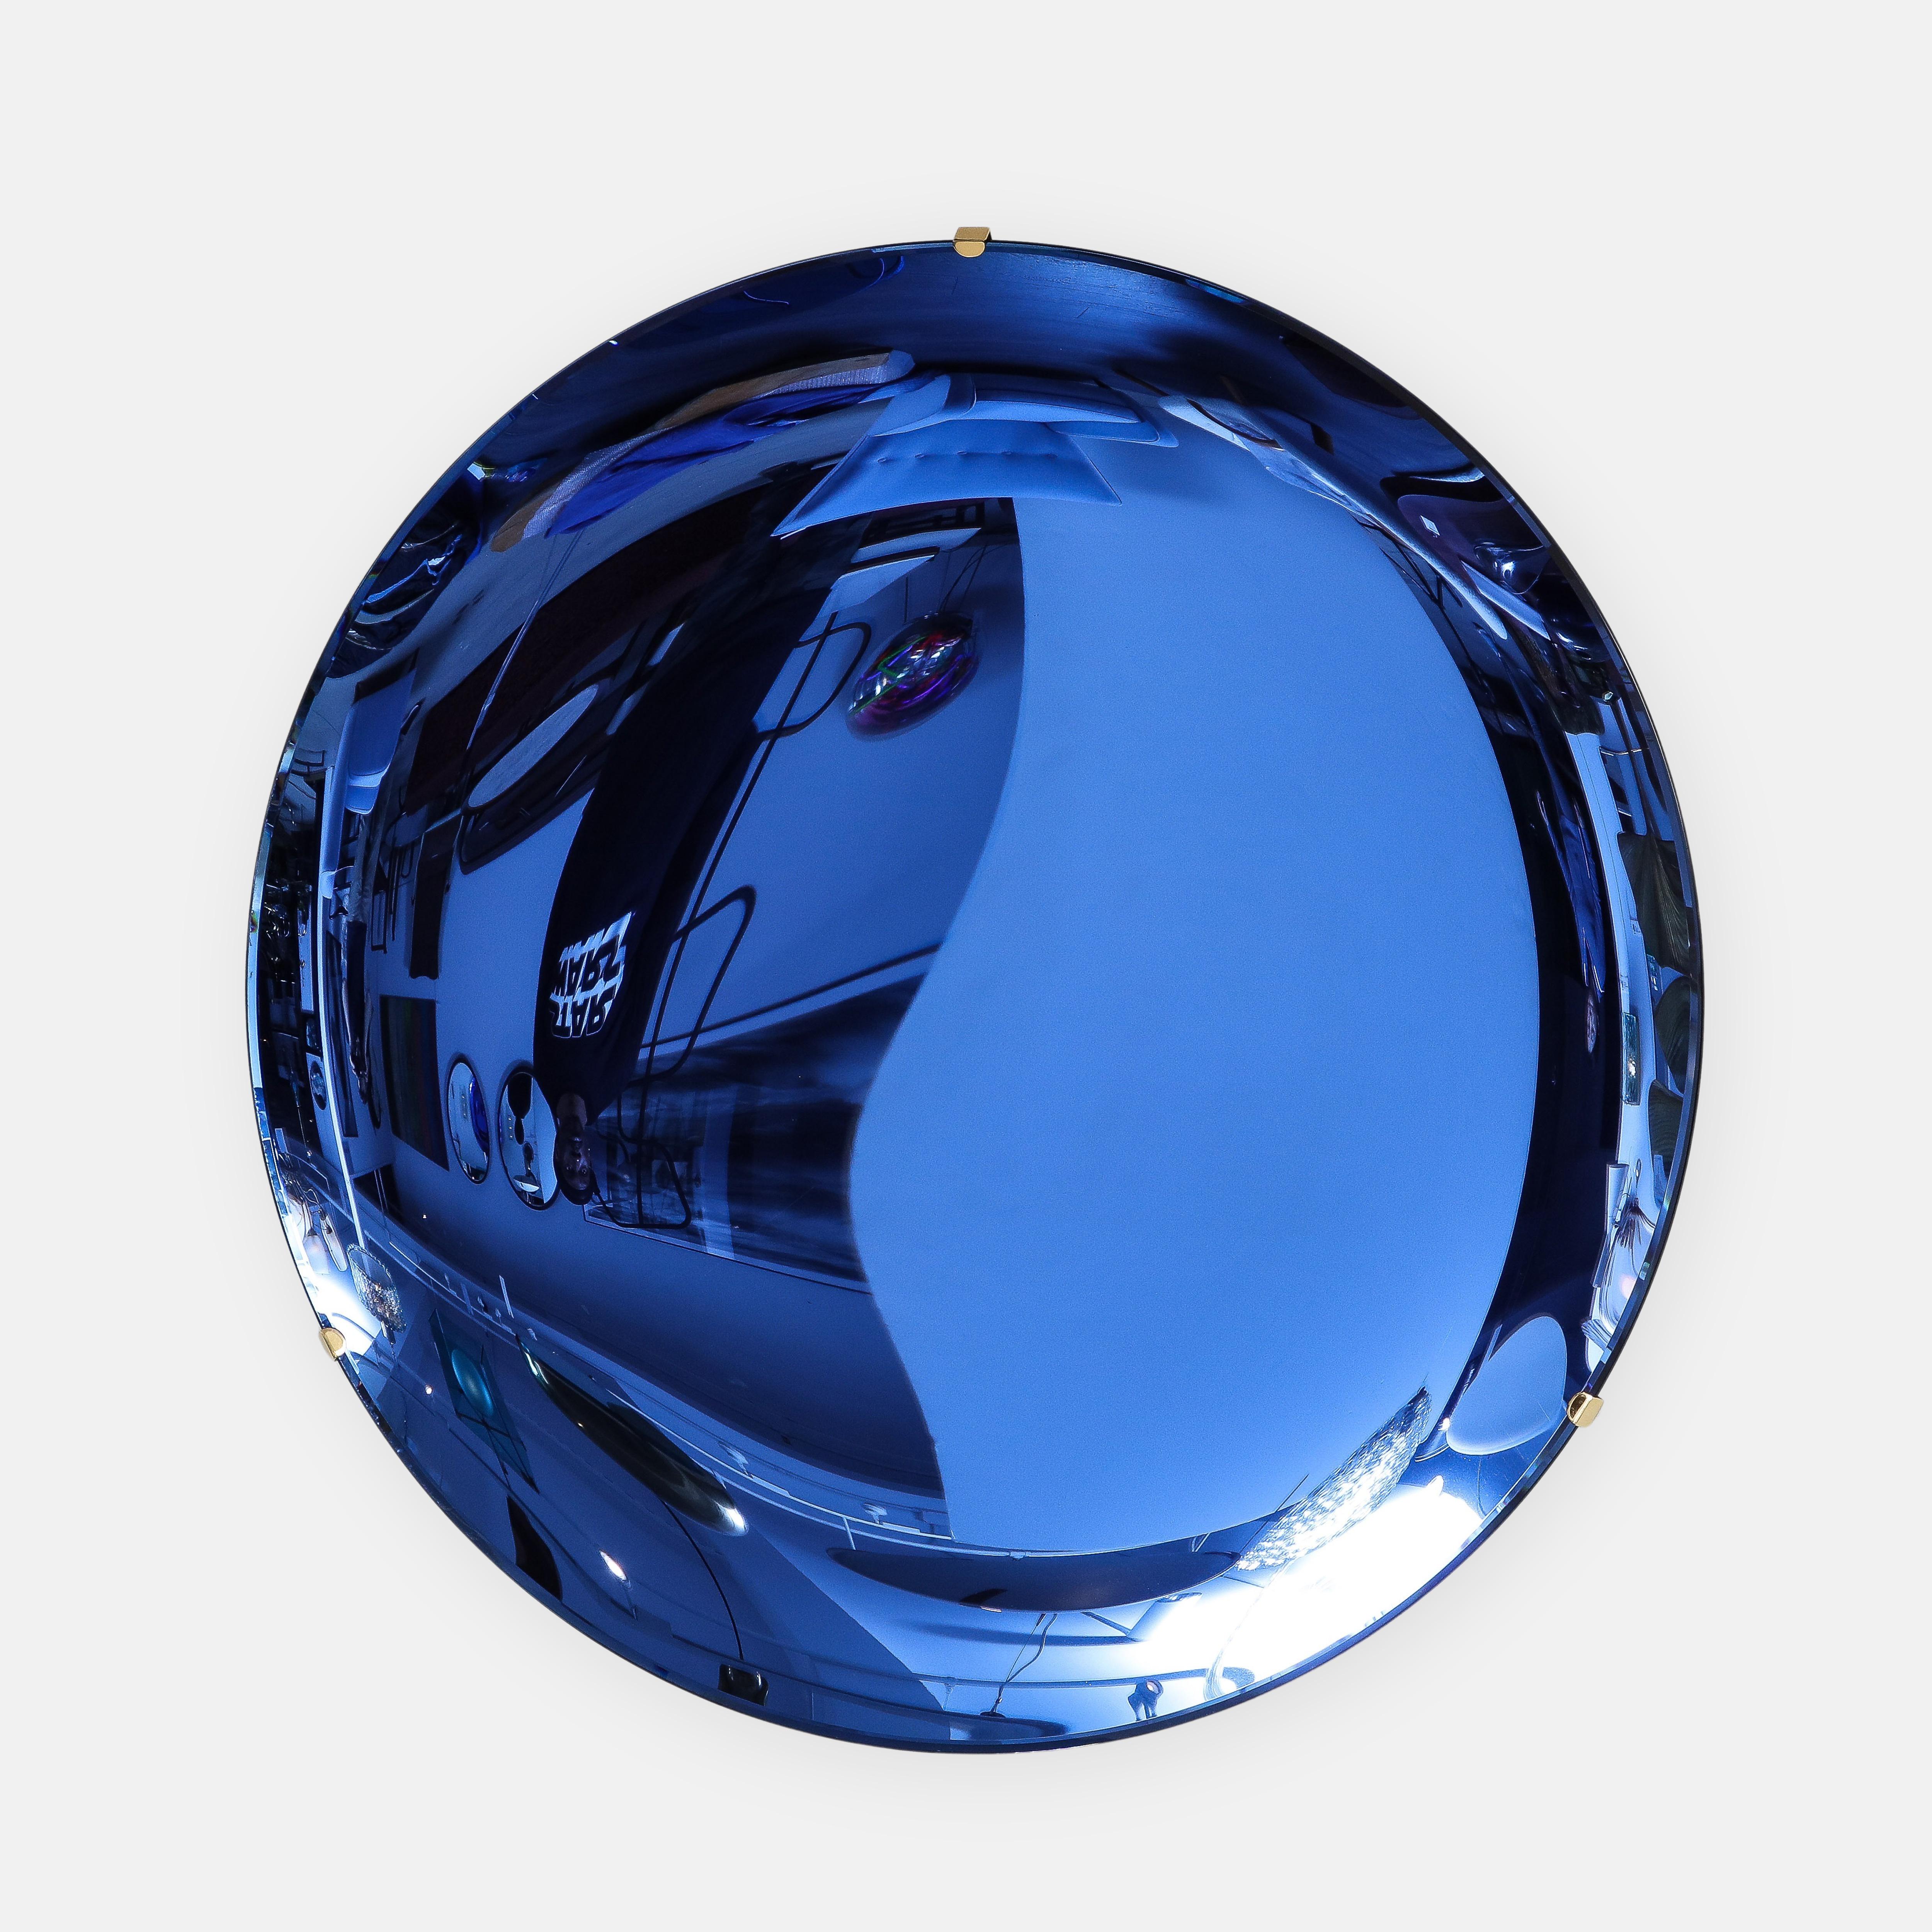 Effetto Vetro contemporary large round concave cobalt blue colored mirrored glass mounted on a polished brass structure on the back with three mounting clips on the front edges, Italy, 2022. This exquisite mirror is a sculptural work of art, grand